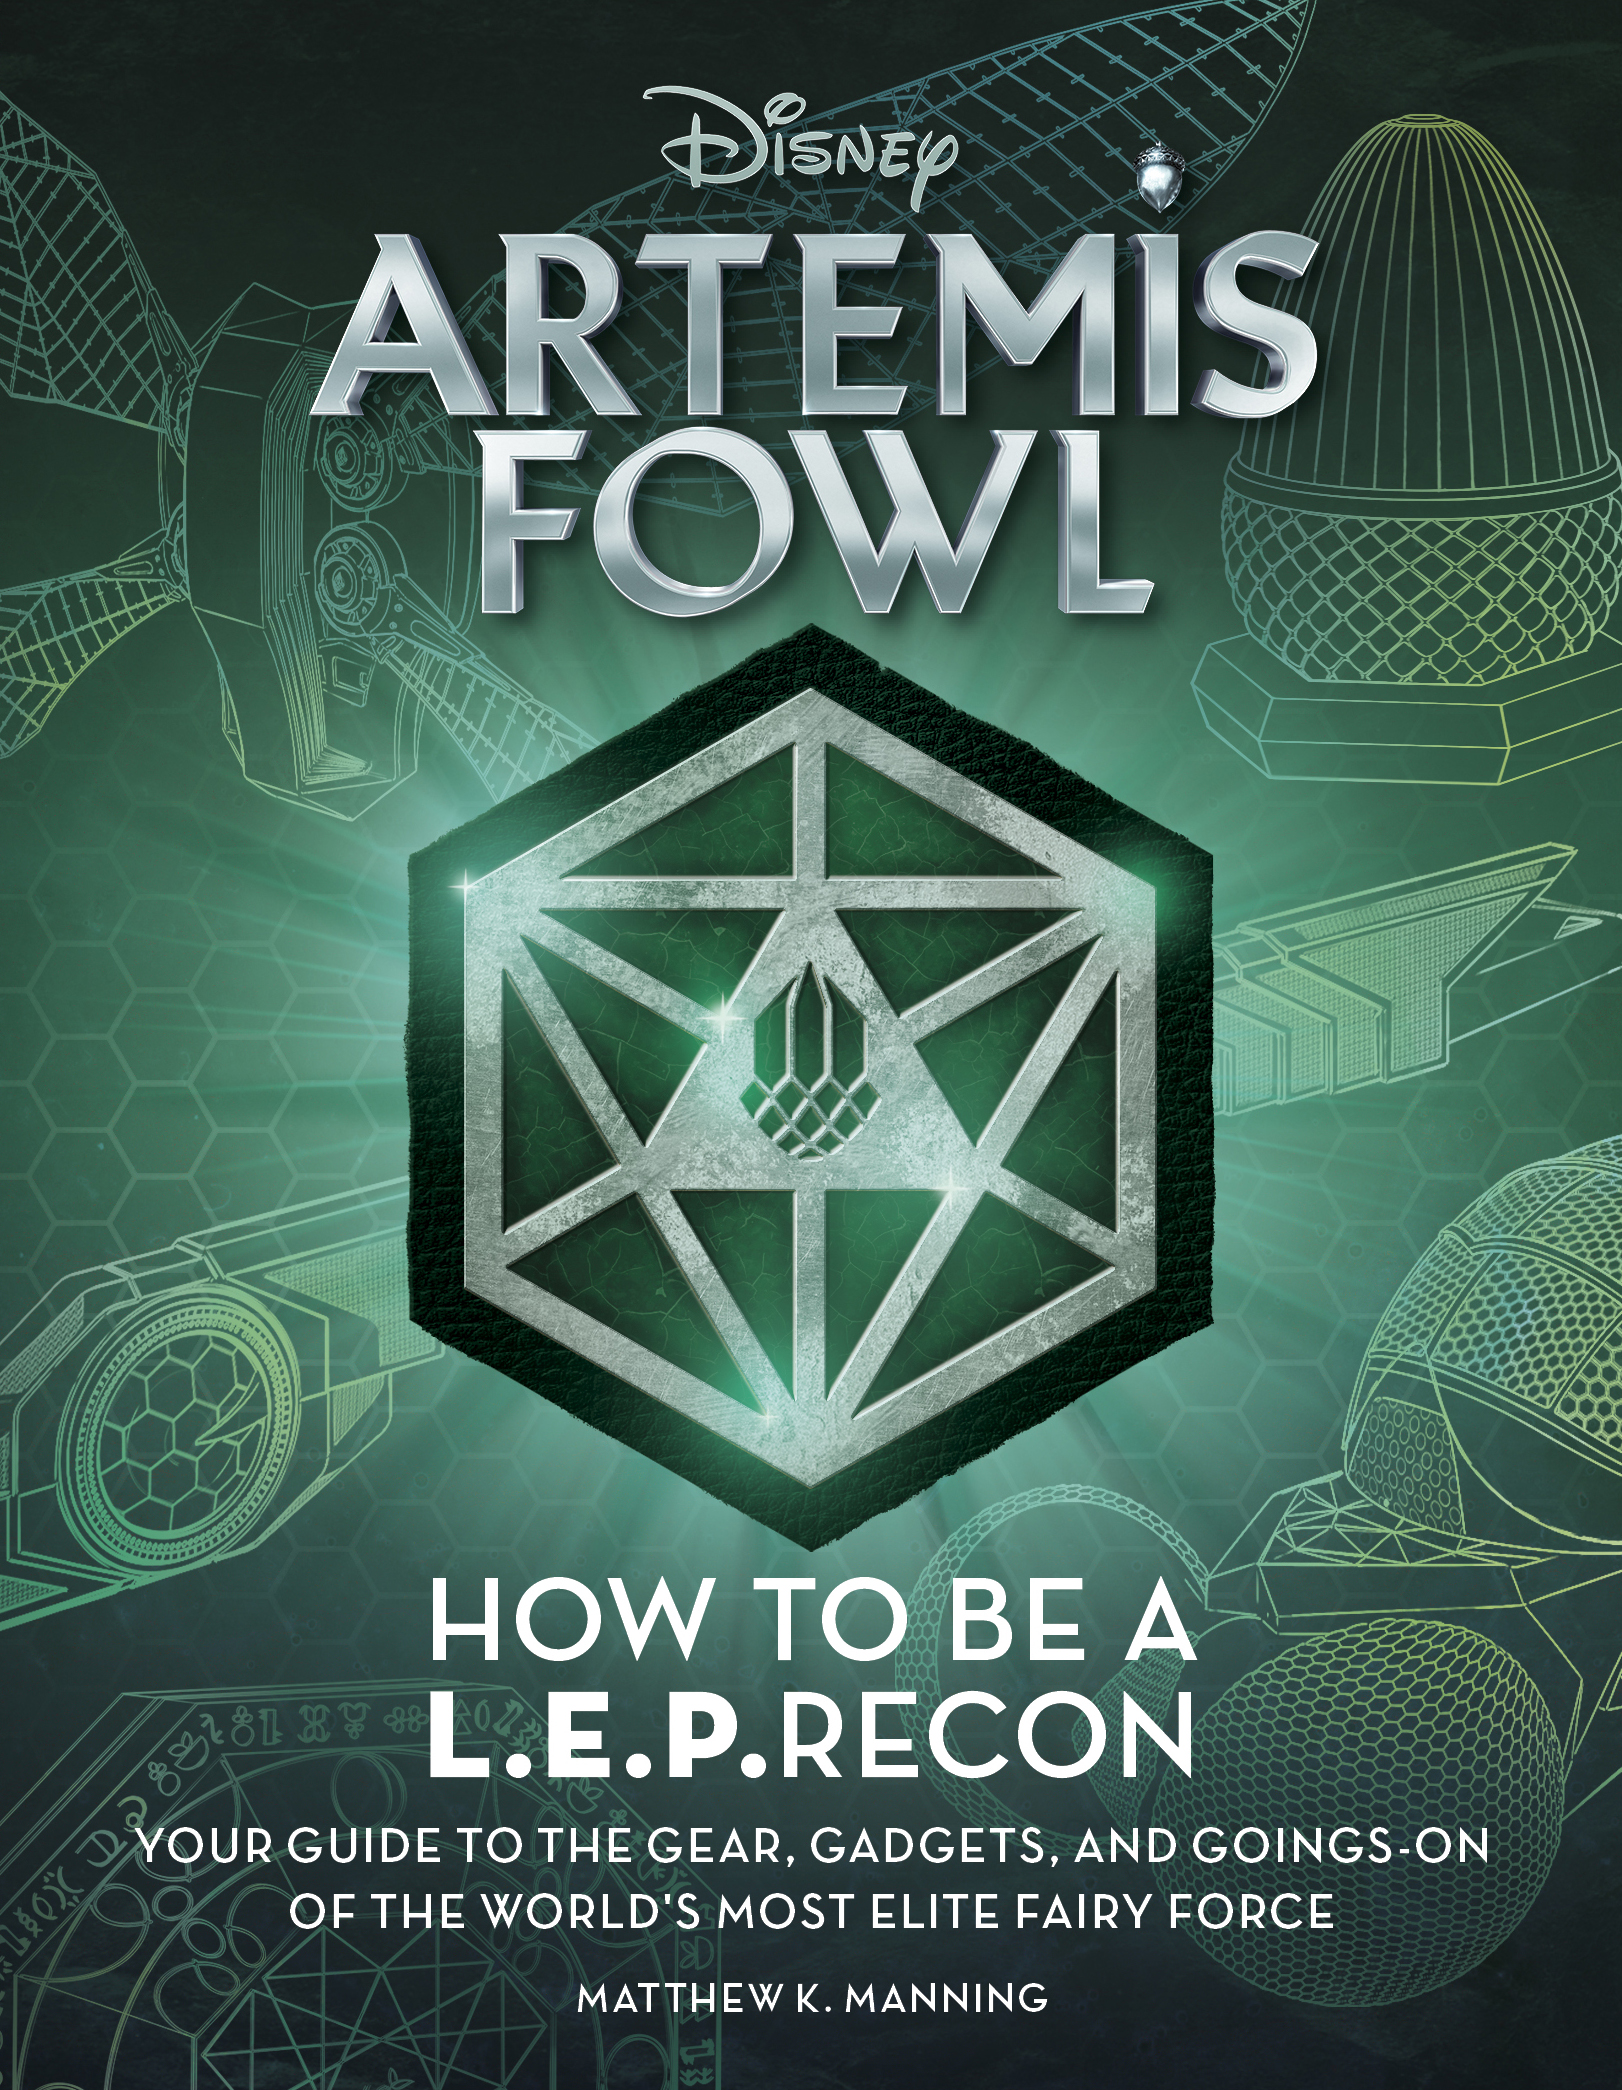 The Artemis Fowl Files, The Ultimate Guide to the Series